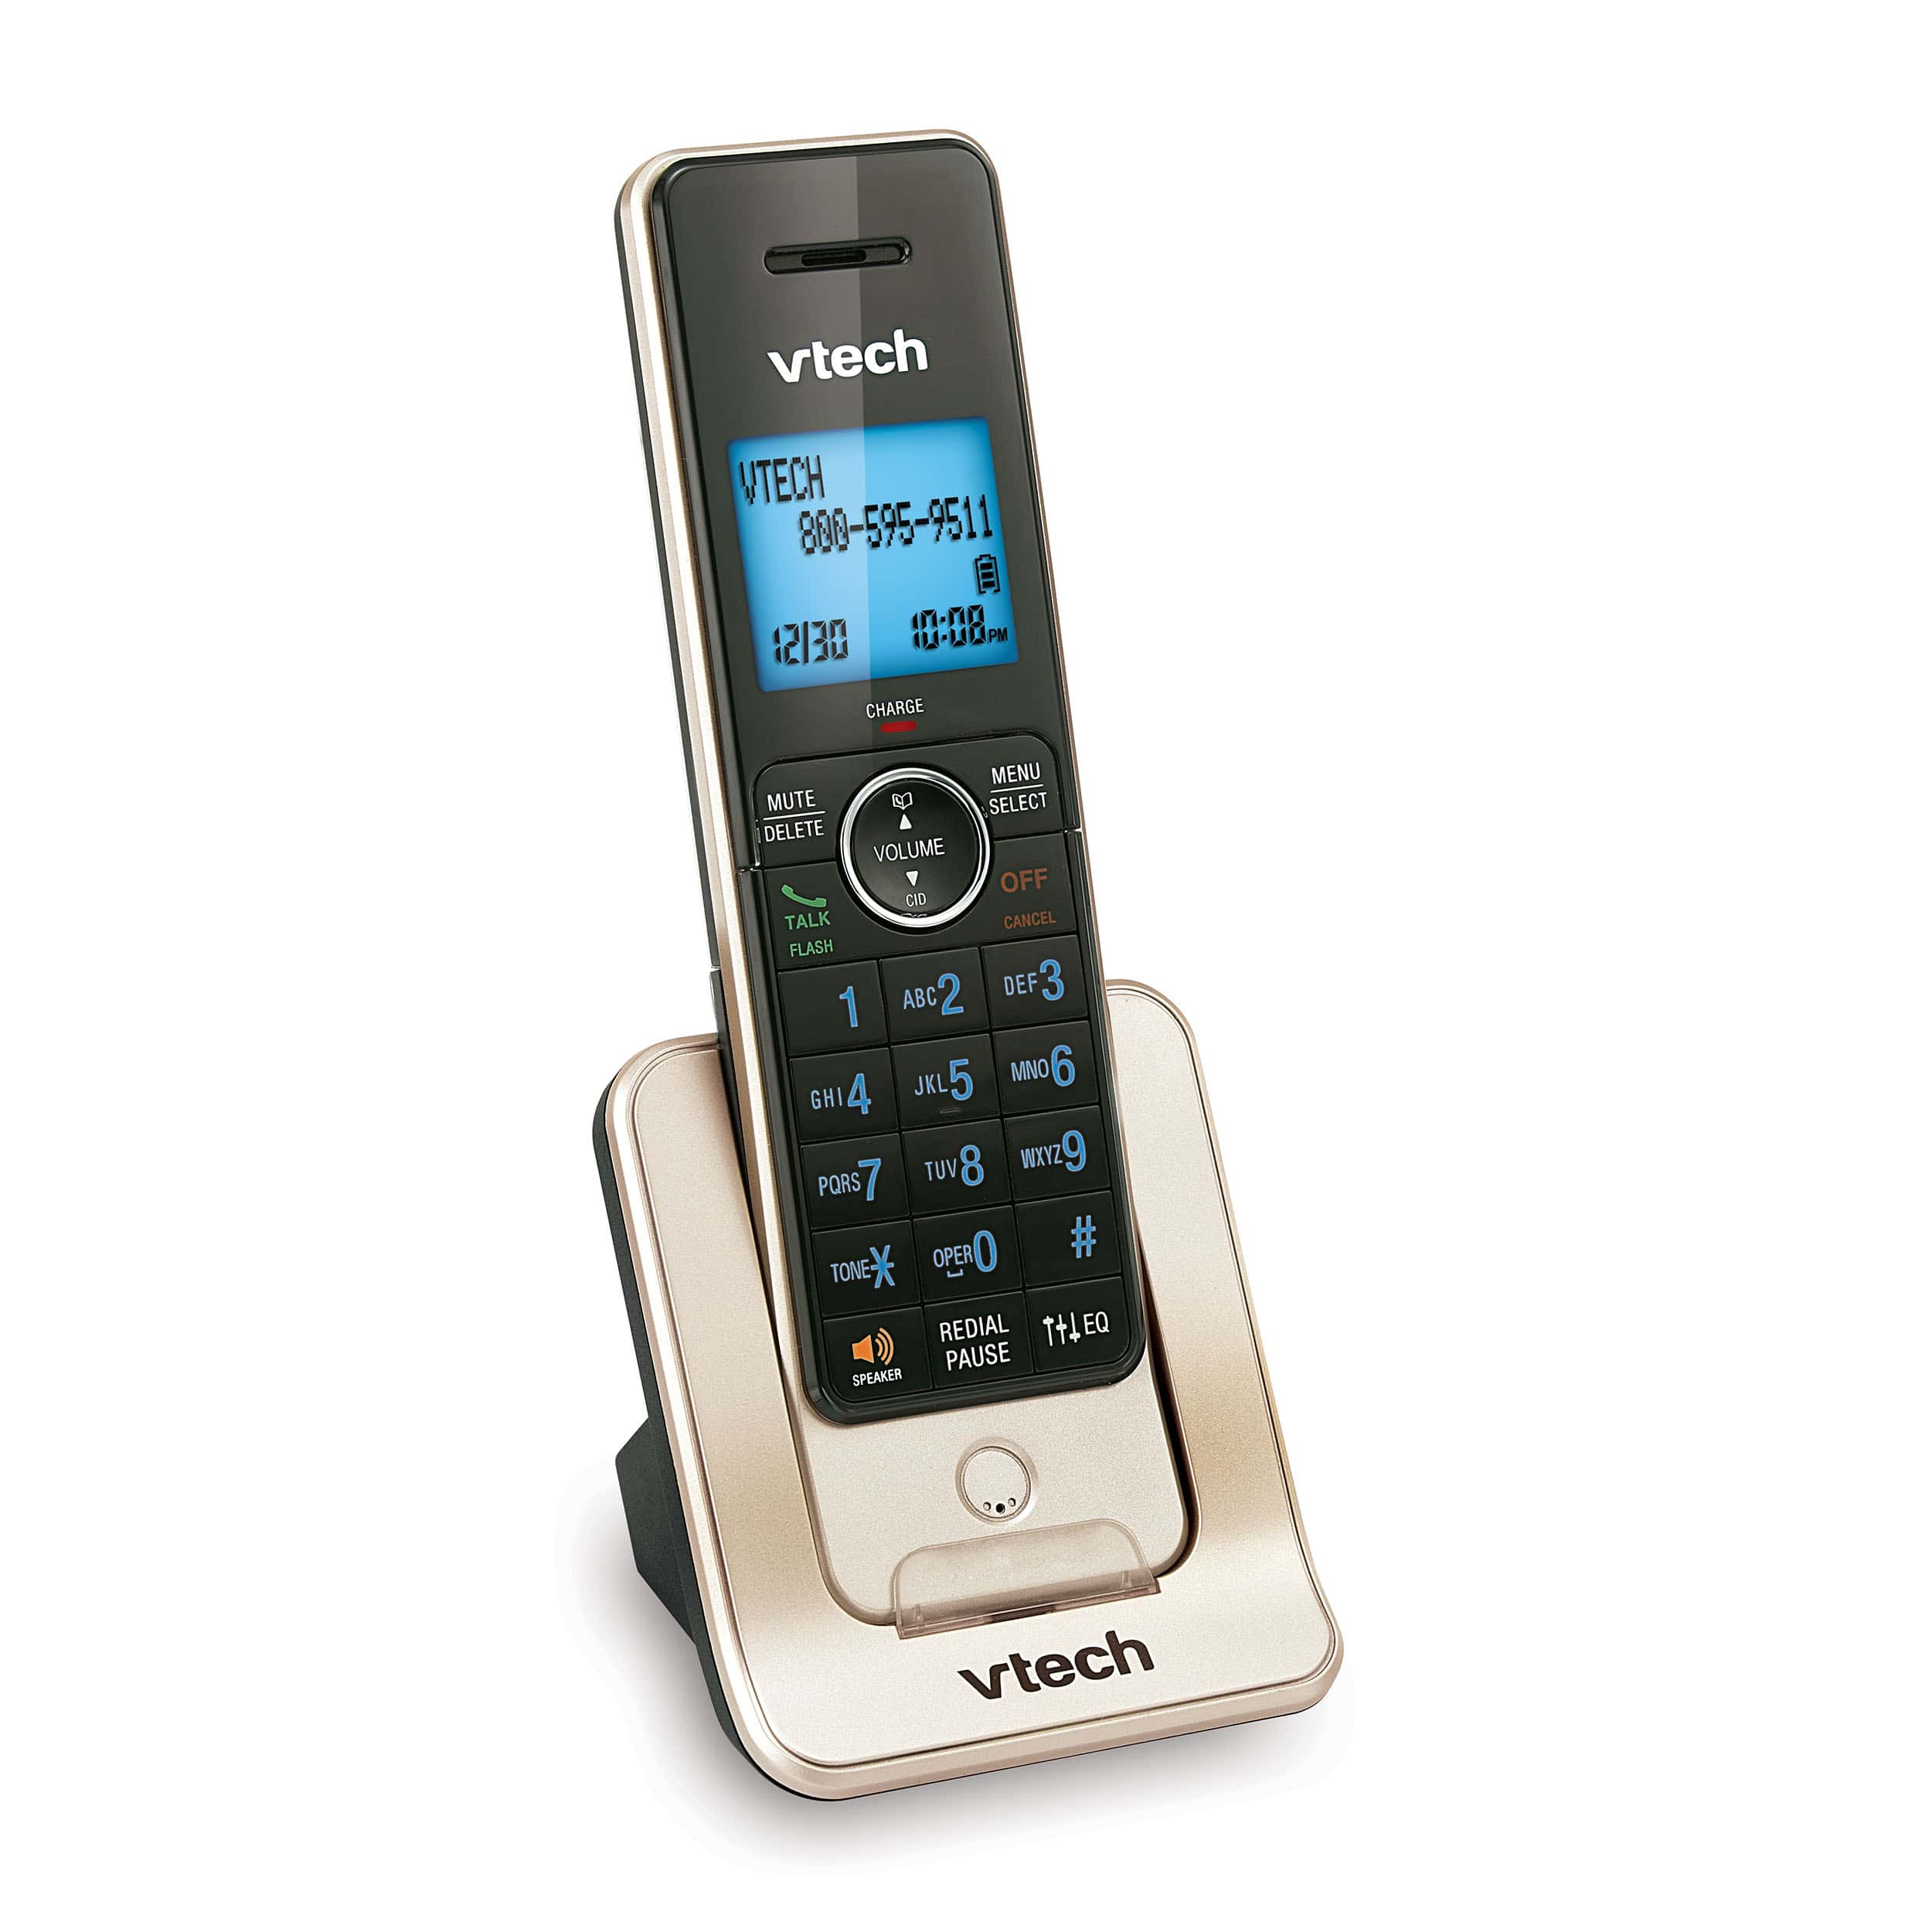 6 Handset Phone System with Caller ID/Call Waiting